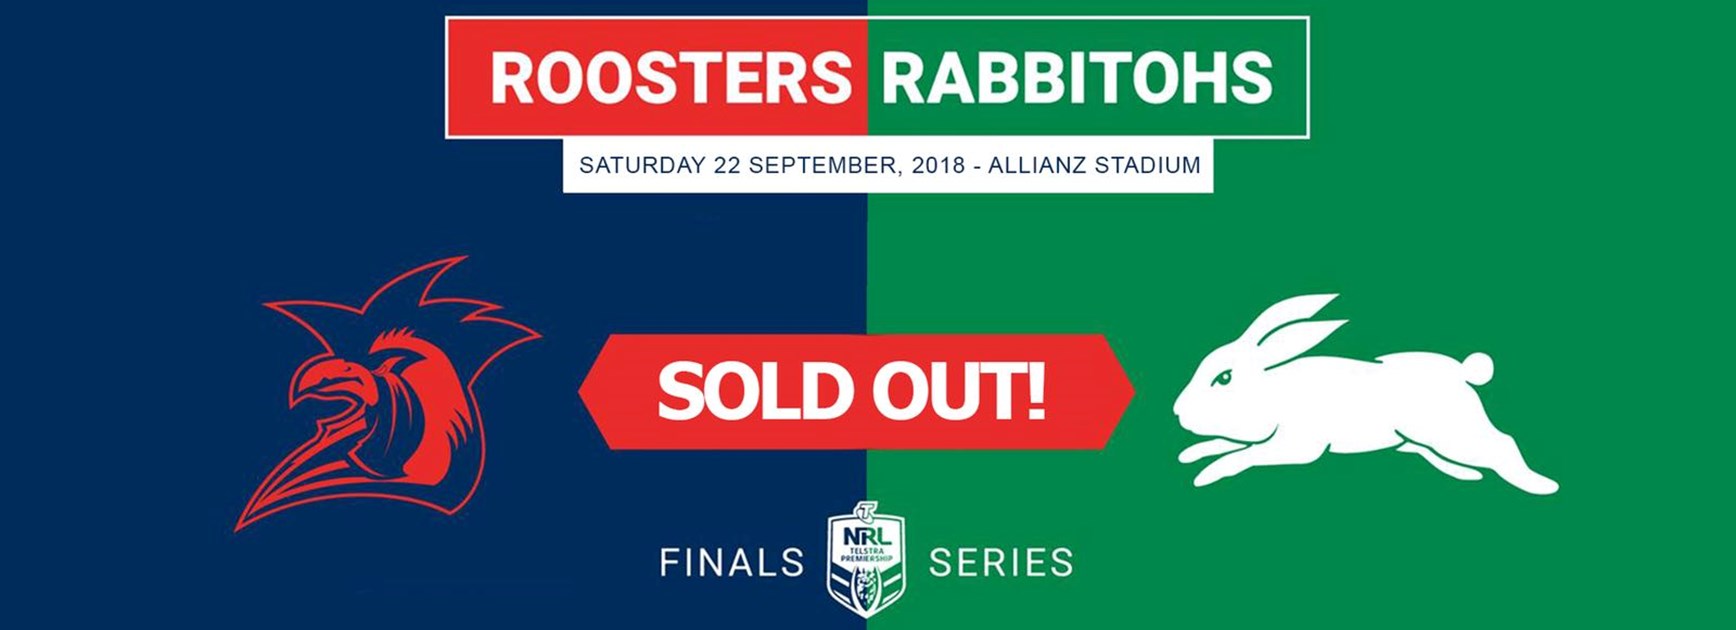 Allianz Stadium preliminary final sold out